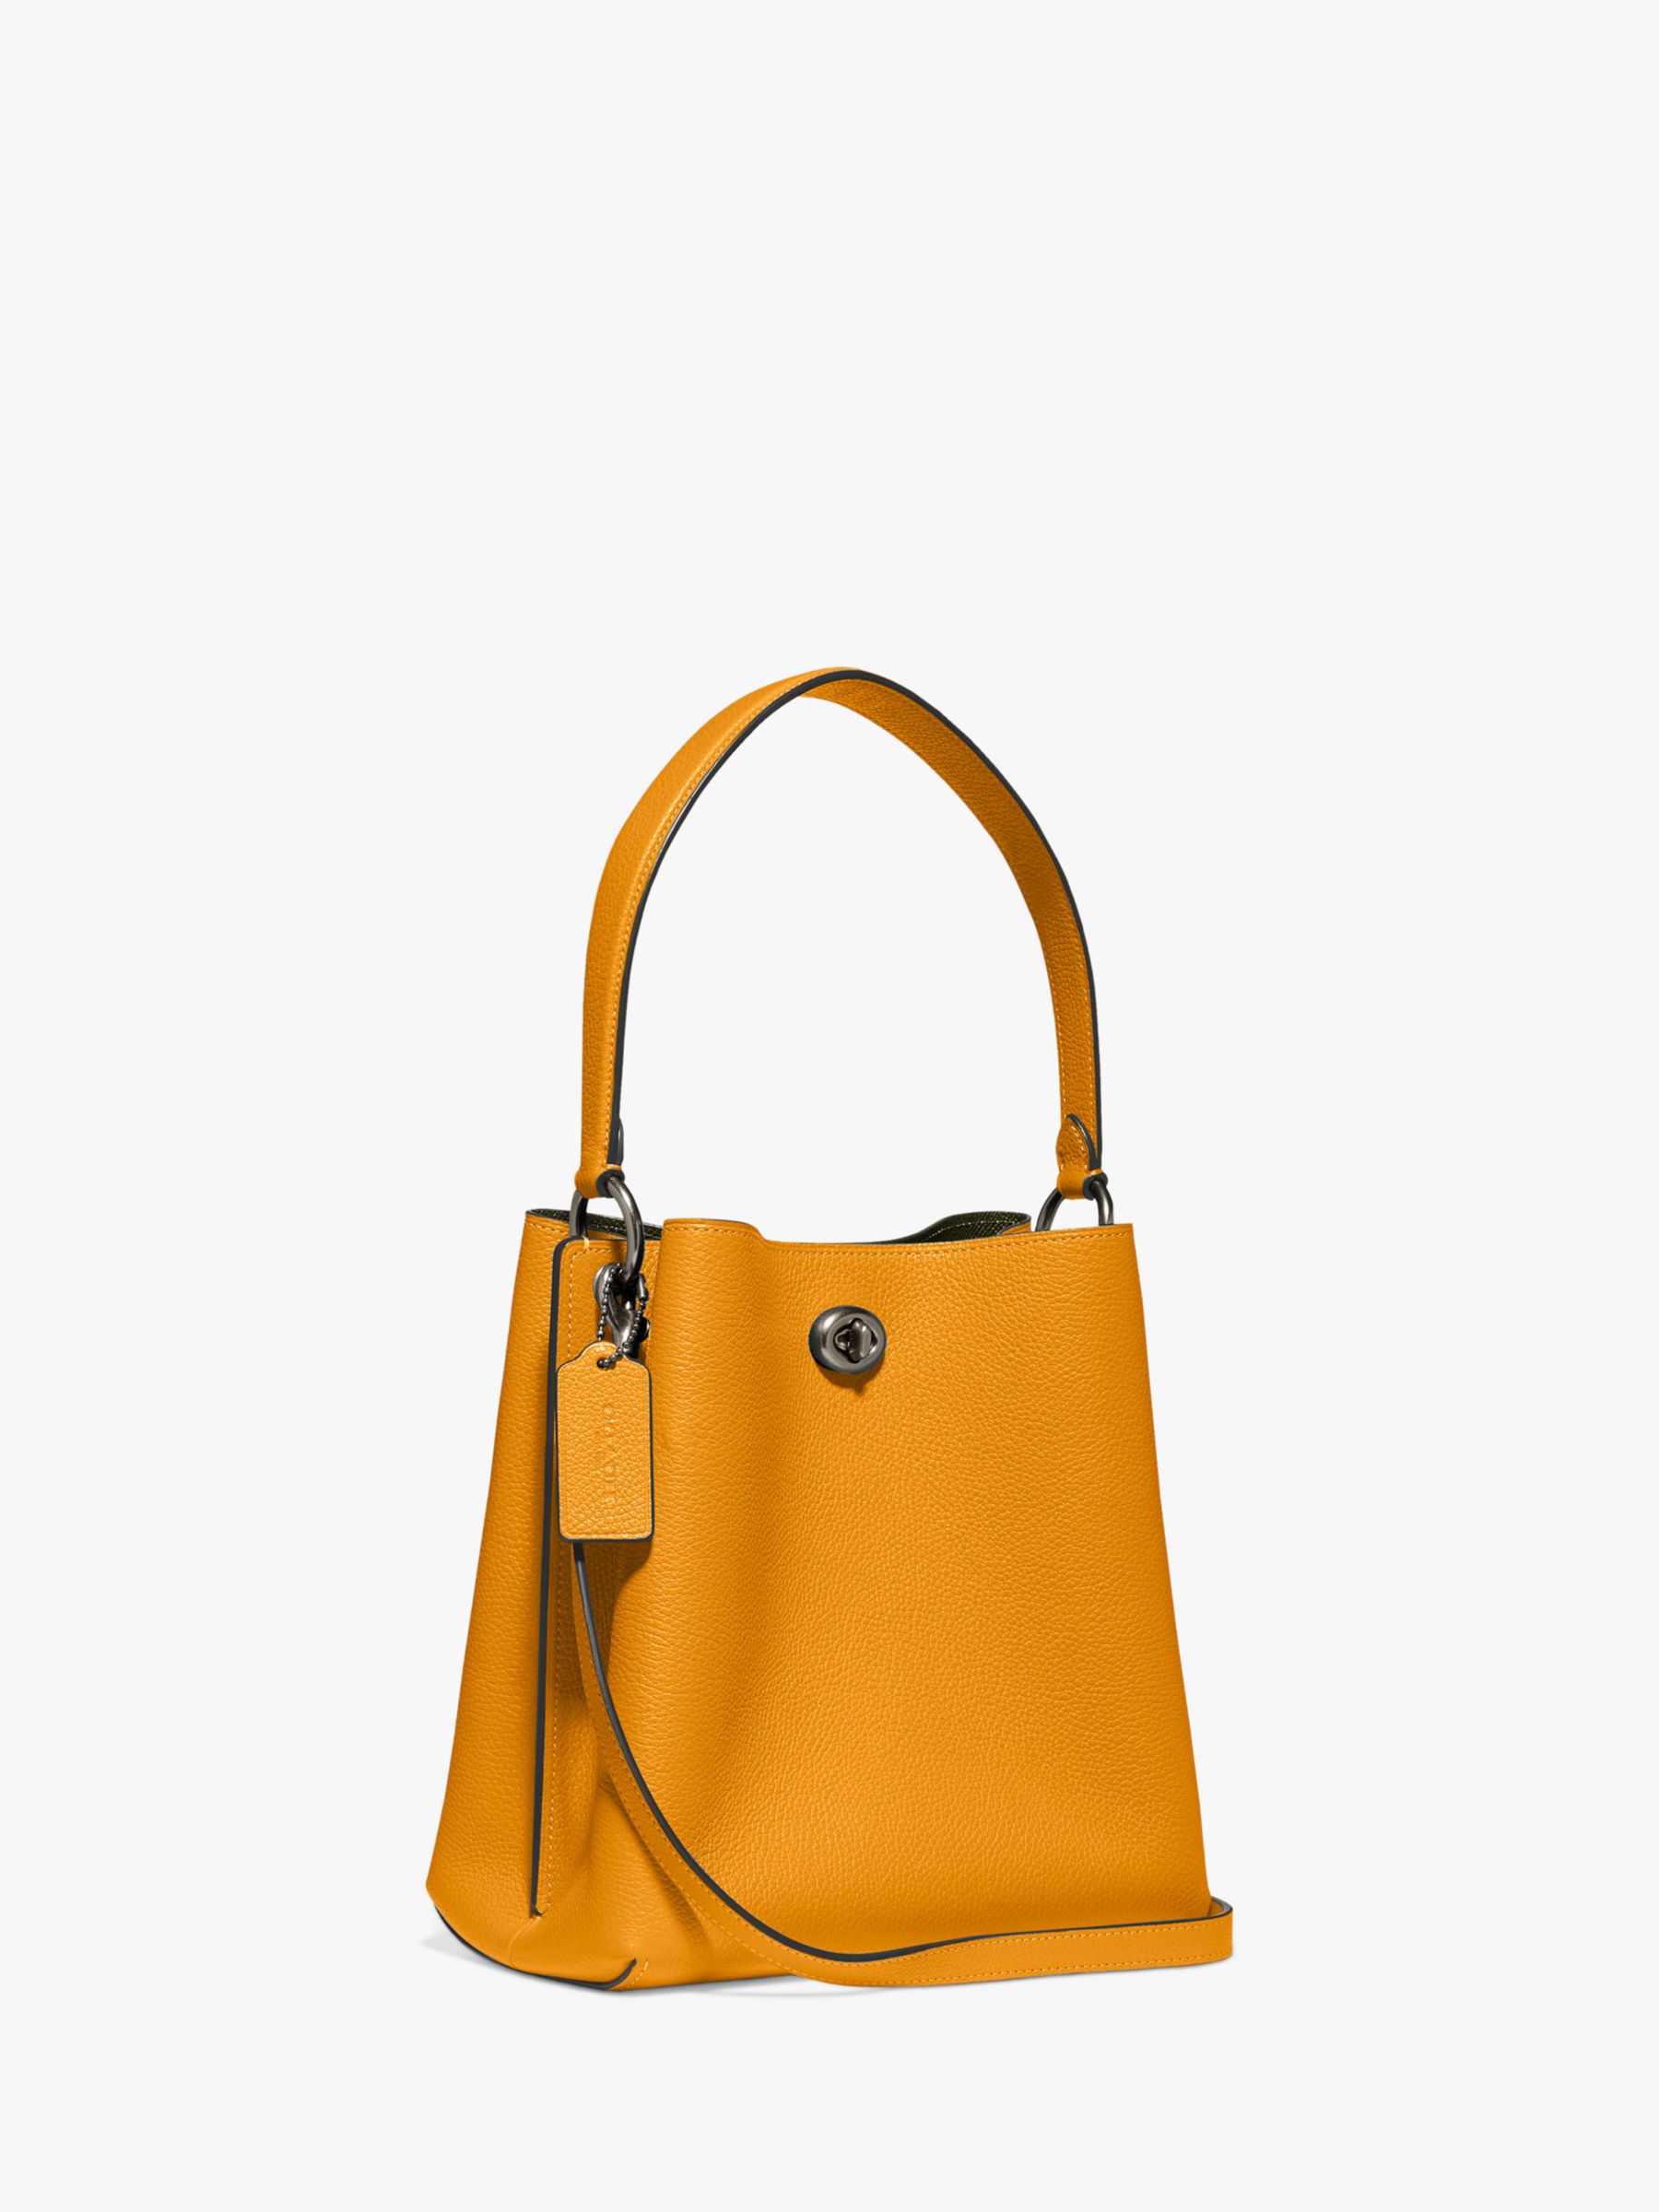 Coach Charlie 21 Leather Bucket Bag, Pollen at John Lewis & Partners